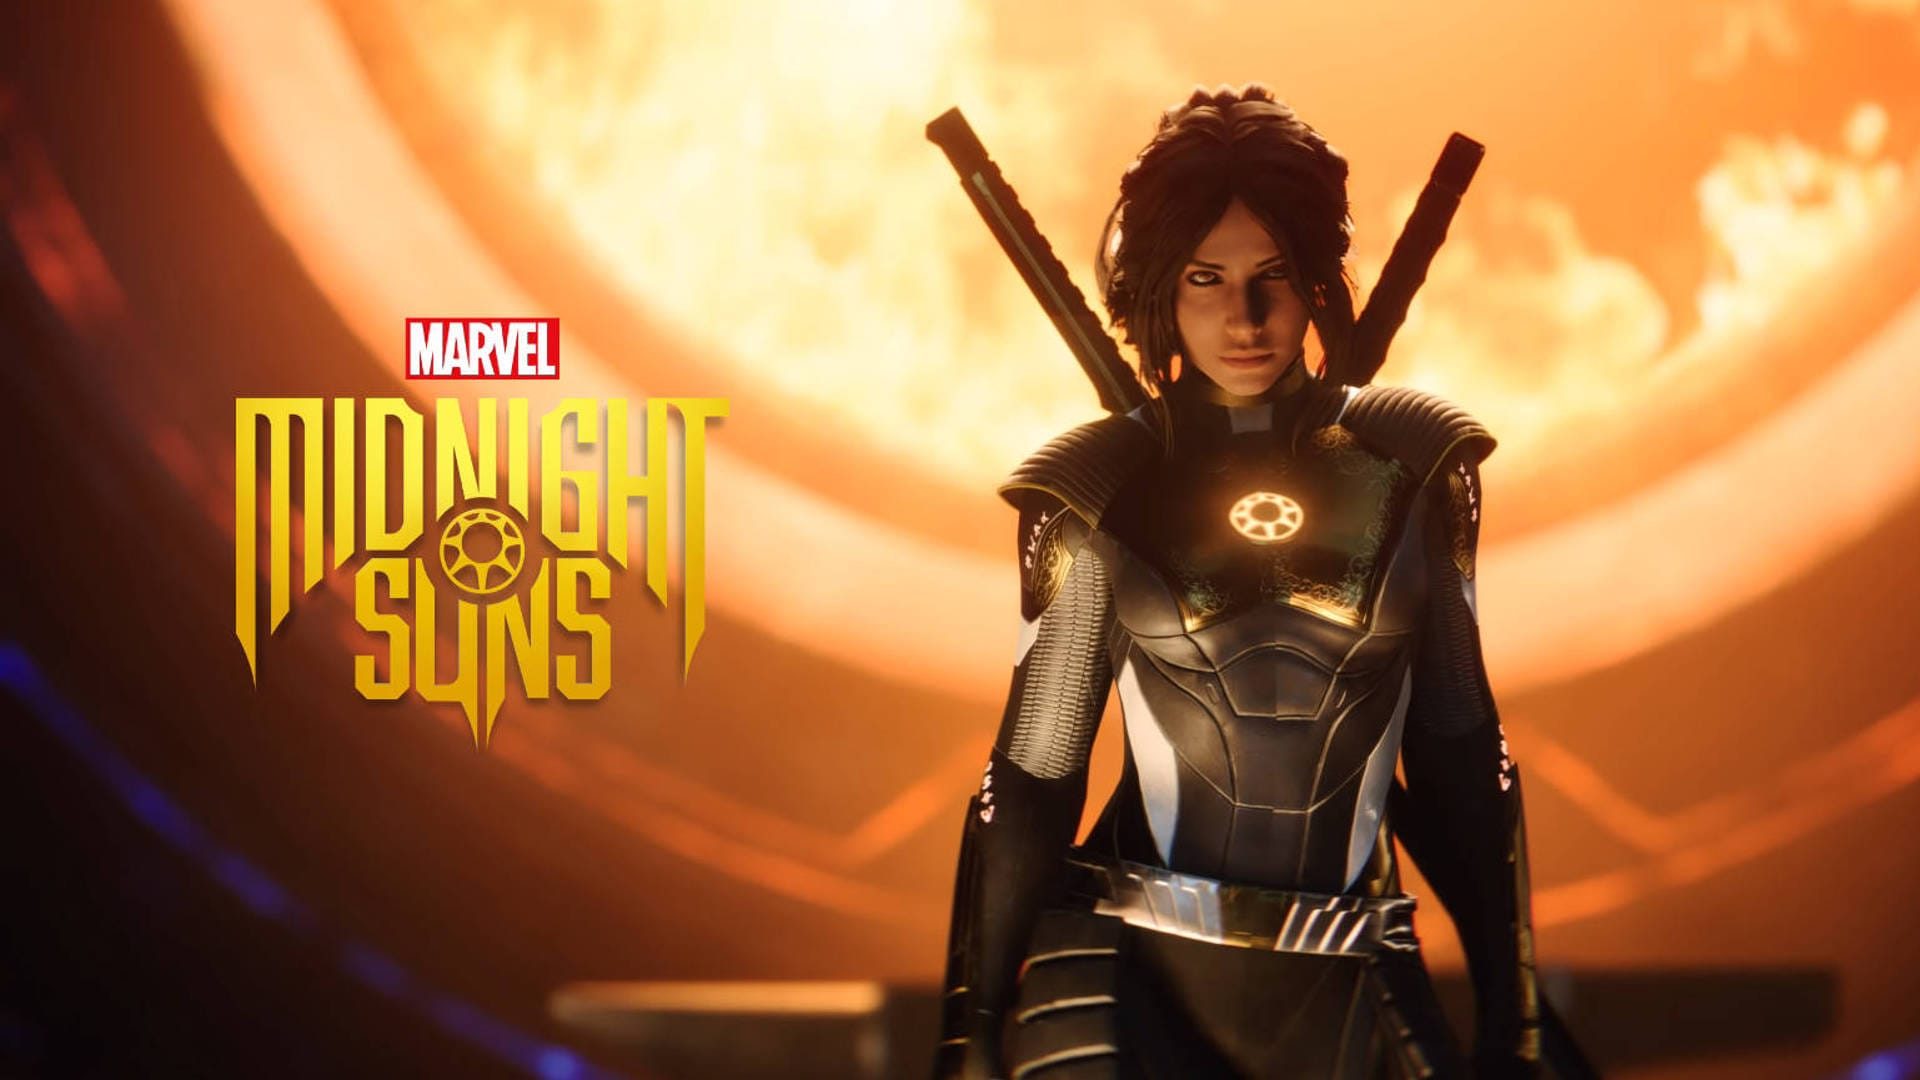 marvel20midnight20suns20microtransactions20gameplay20cover-5620556